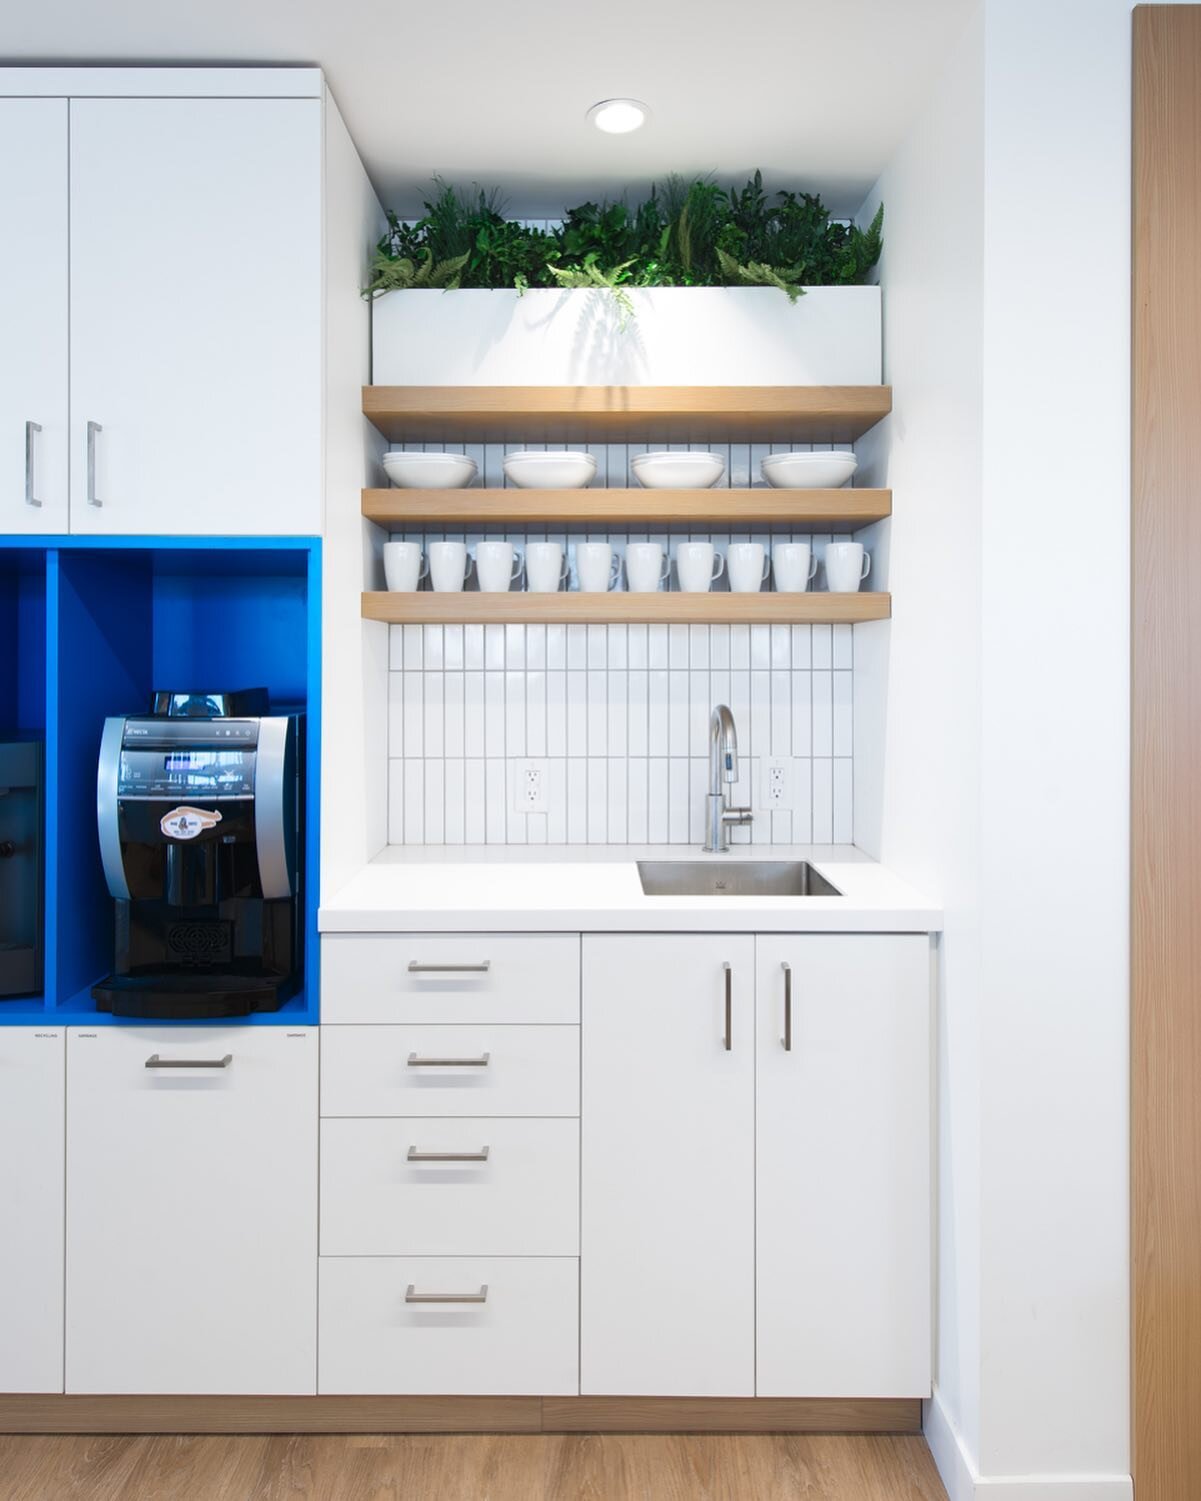 Isn&rsquo;t this the cutest little kitchen?! Love the bright white millwork with warm wood accents and a fun pop of blue at the offices of @vancouverbraces. 

Interior Design: @ssdginteriors